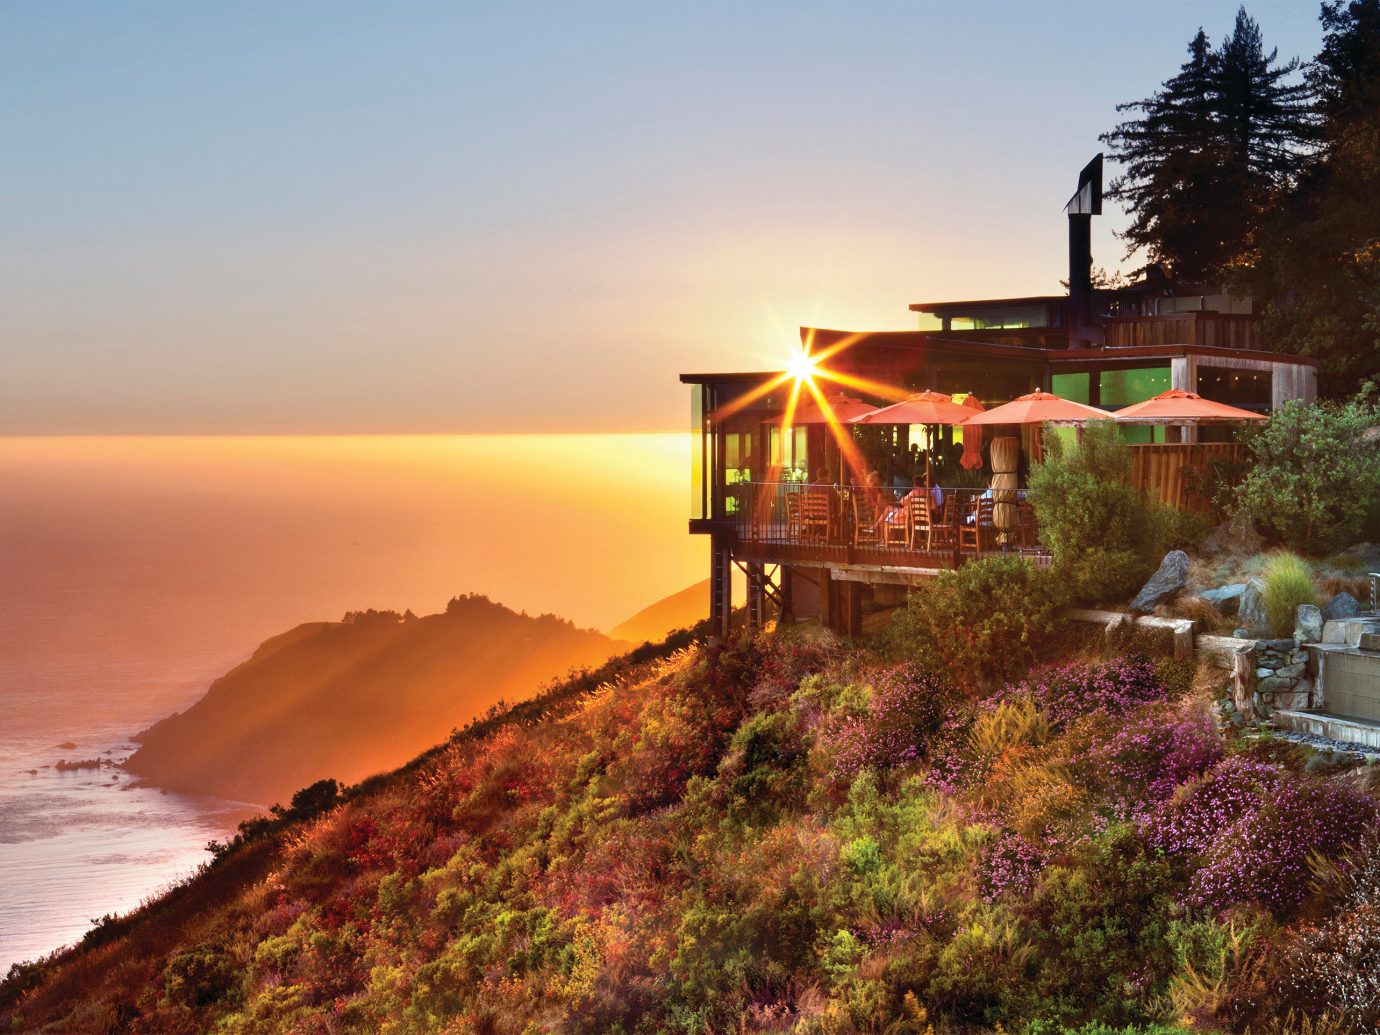 view of Post Ranch Inn perched on a cliff over the ocean during sunset